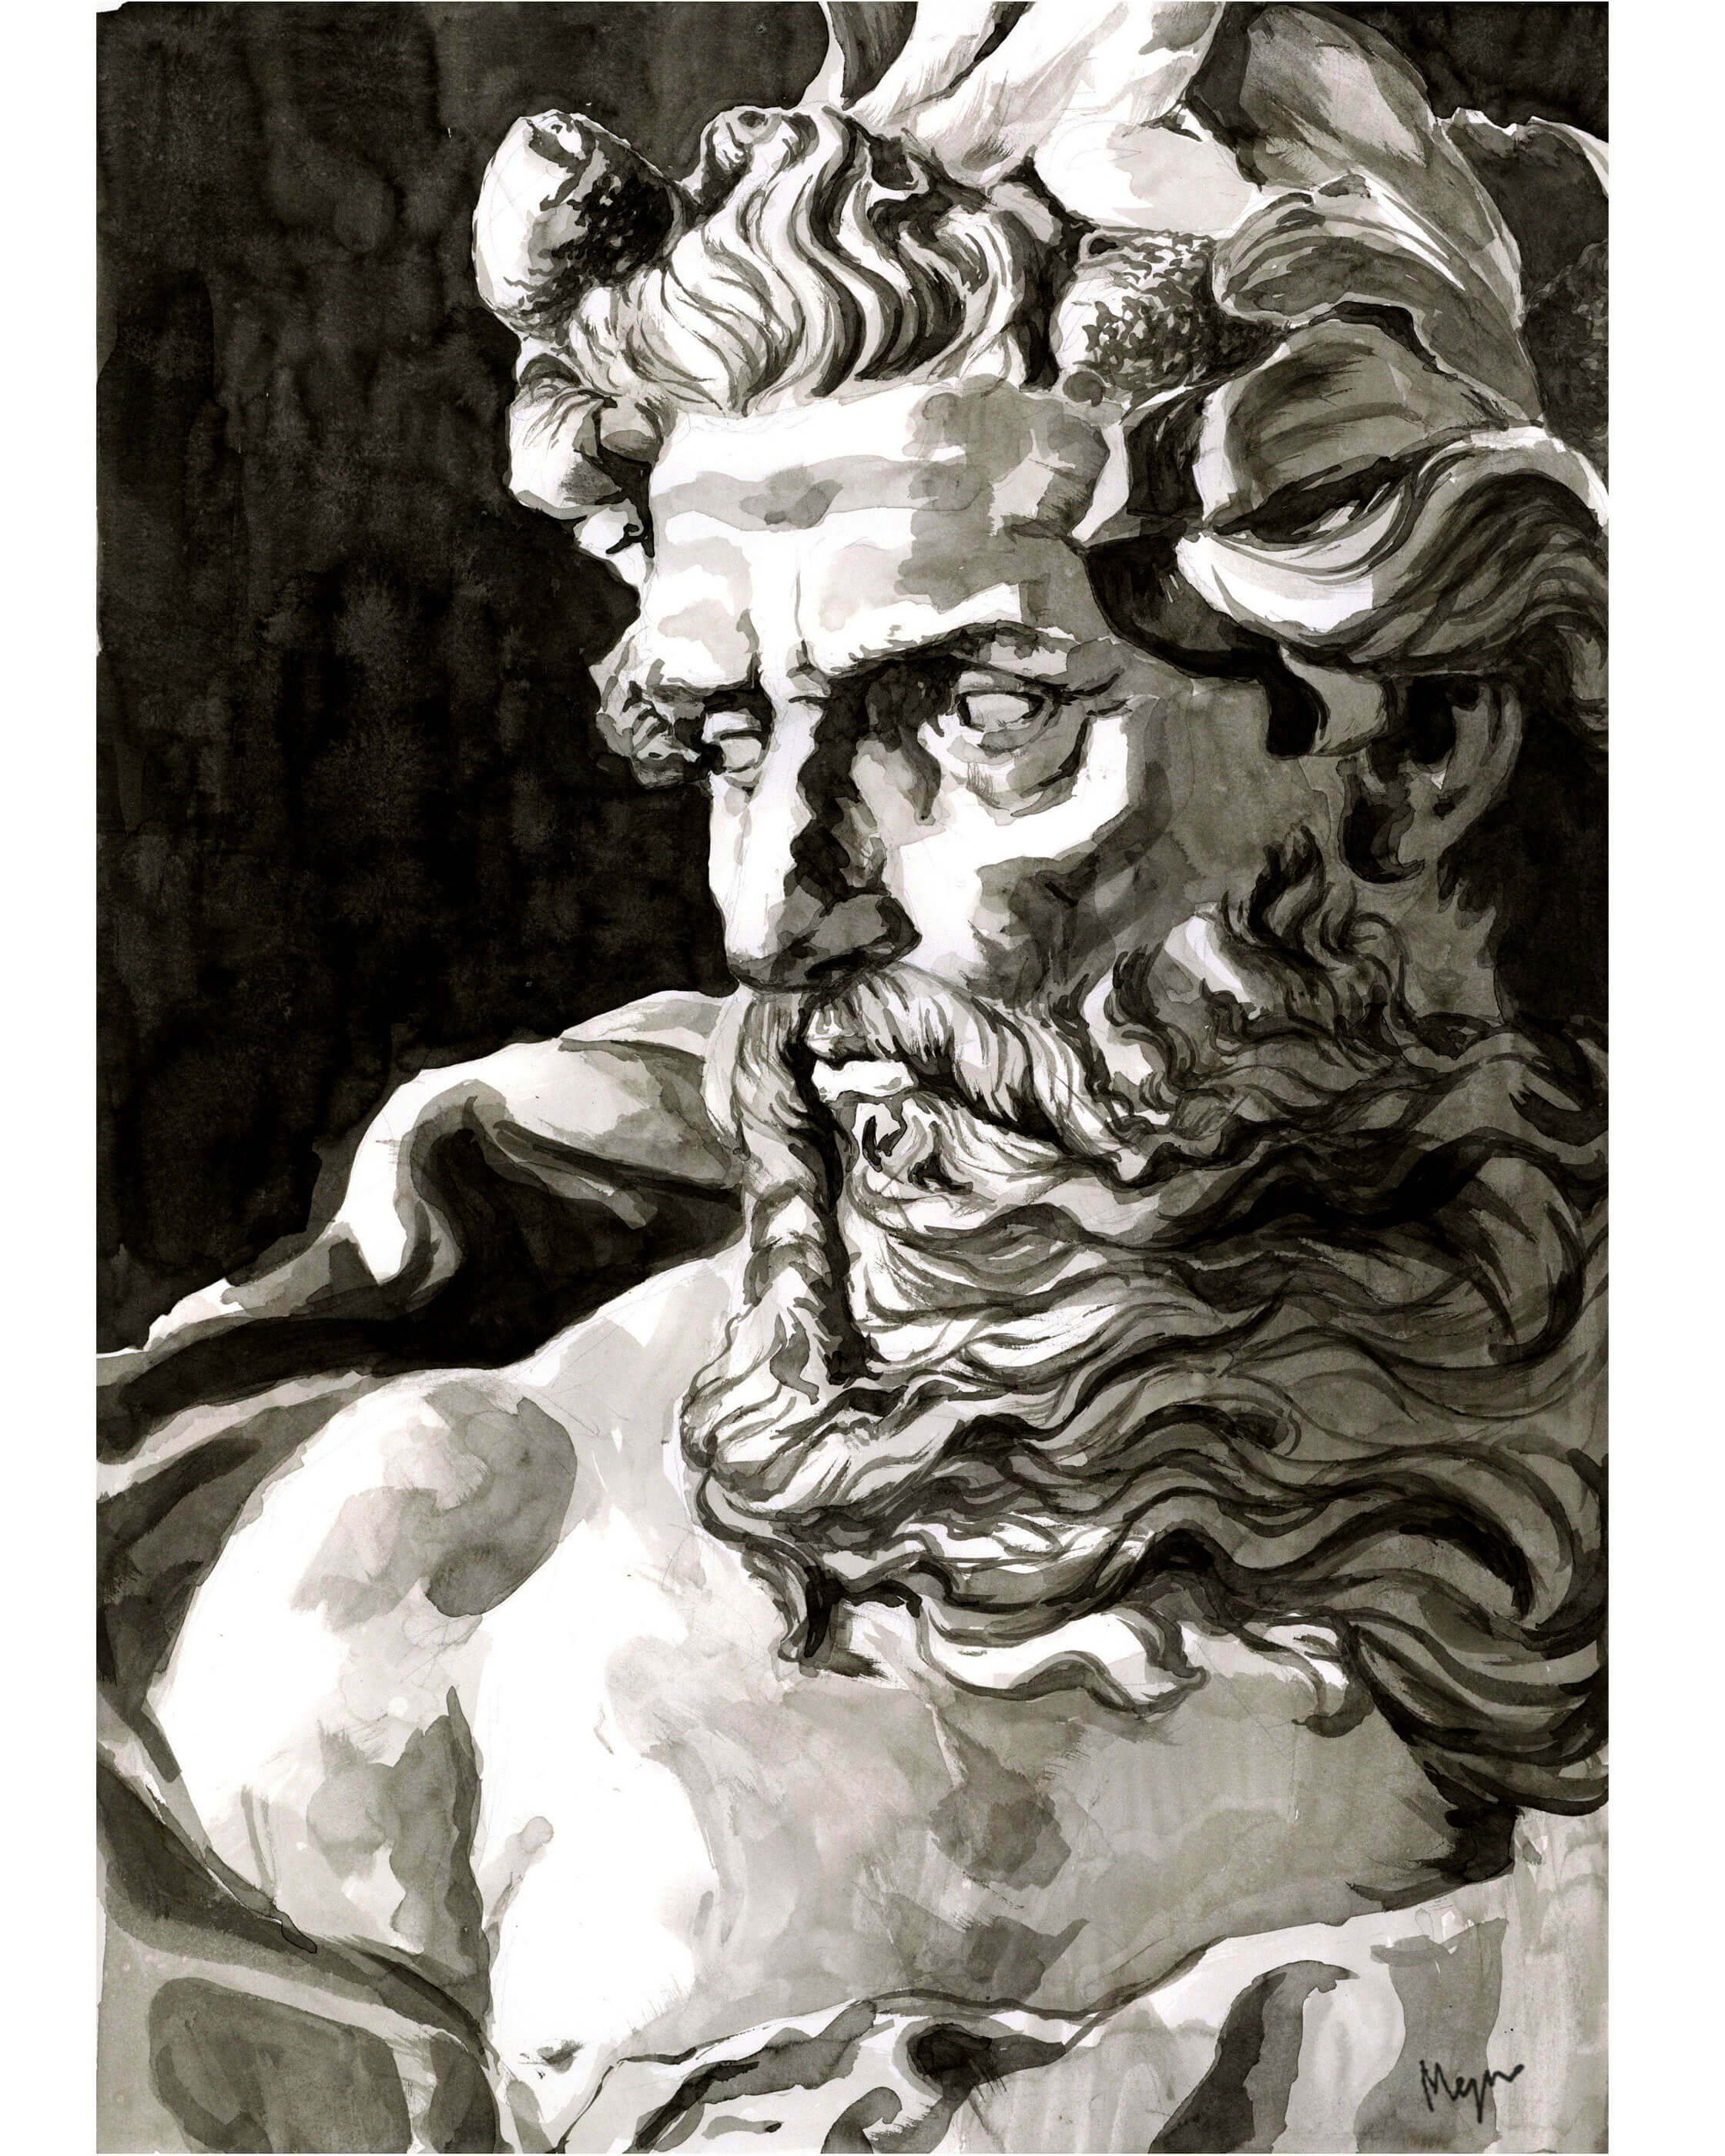 Black-and-White rendition of a portrait of Zeus.